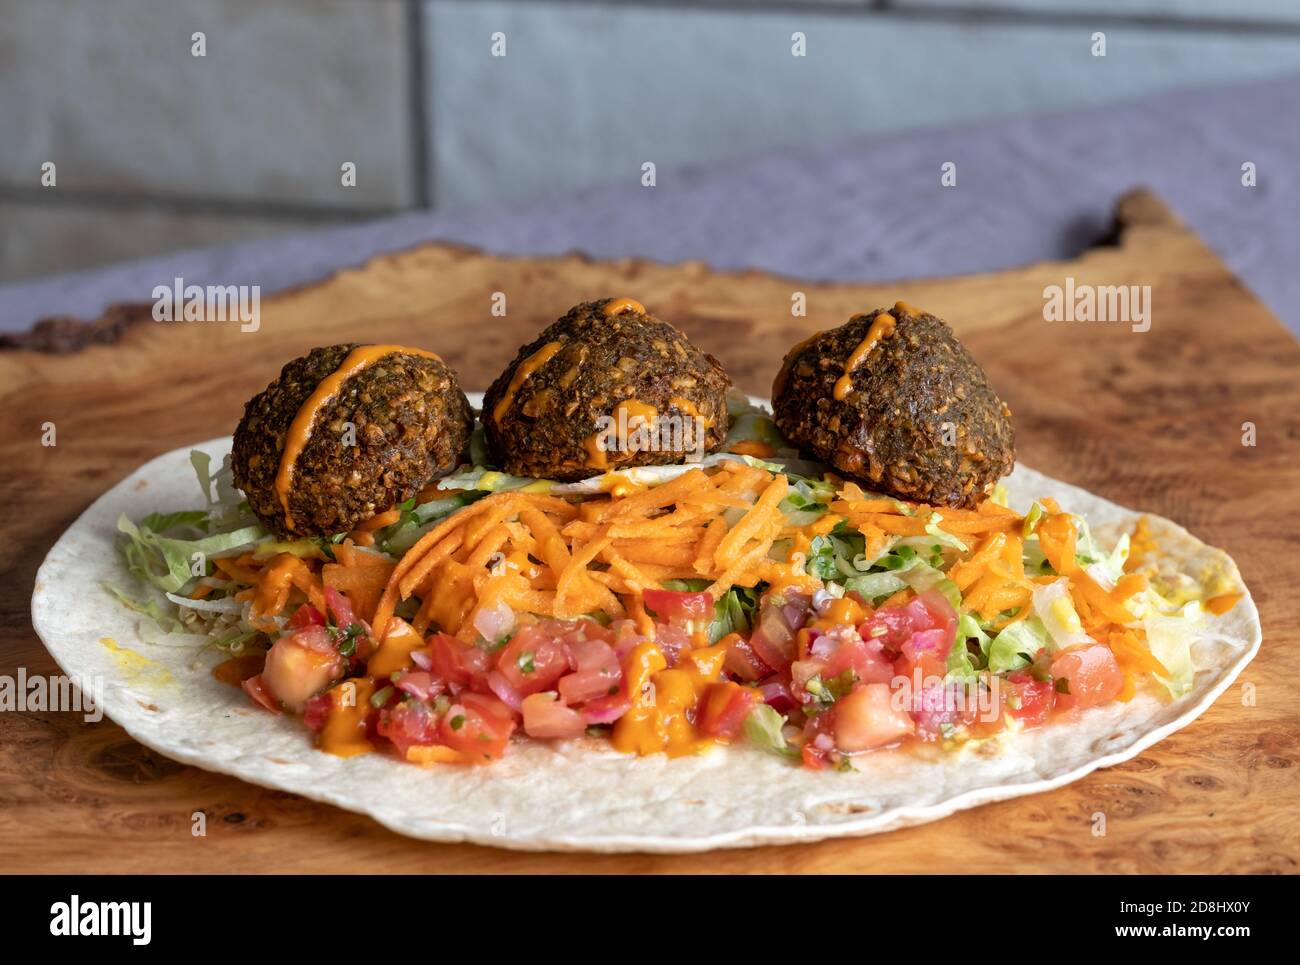 Fried falafal balls with colourful salad in a wrap, with sauce over. Stock Photo